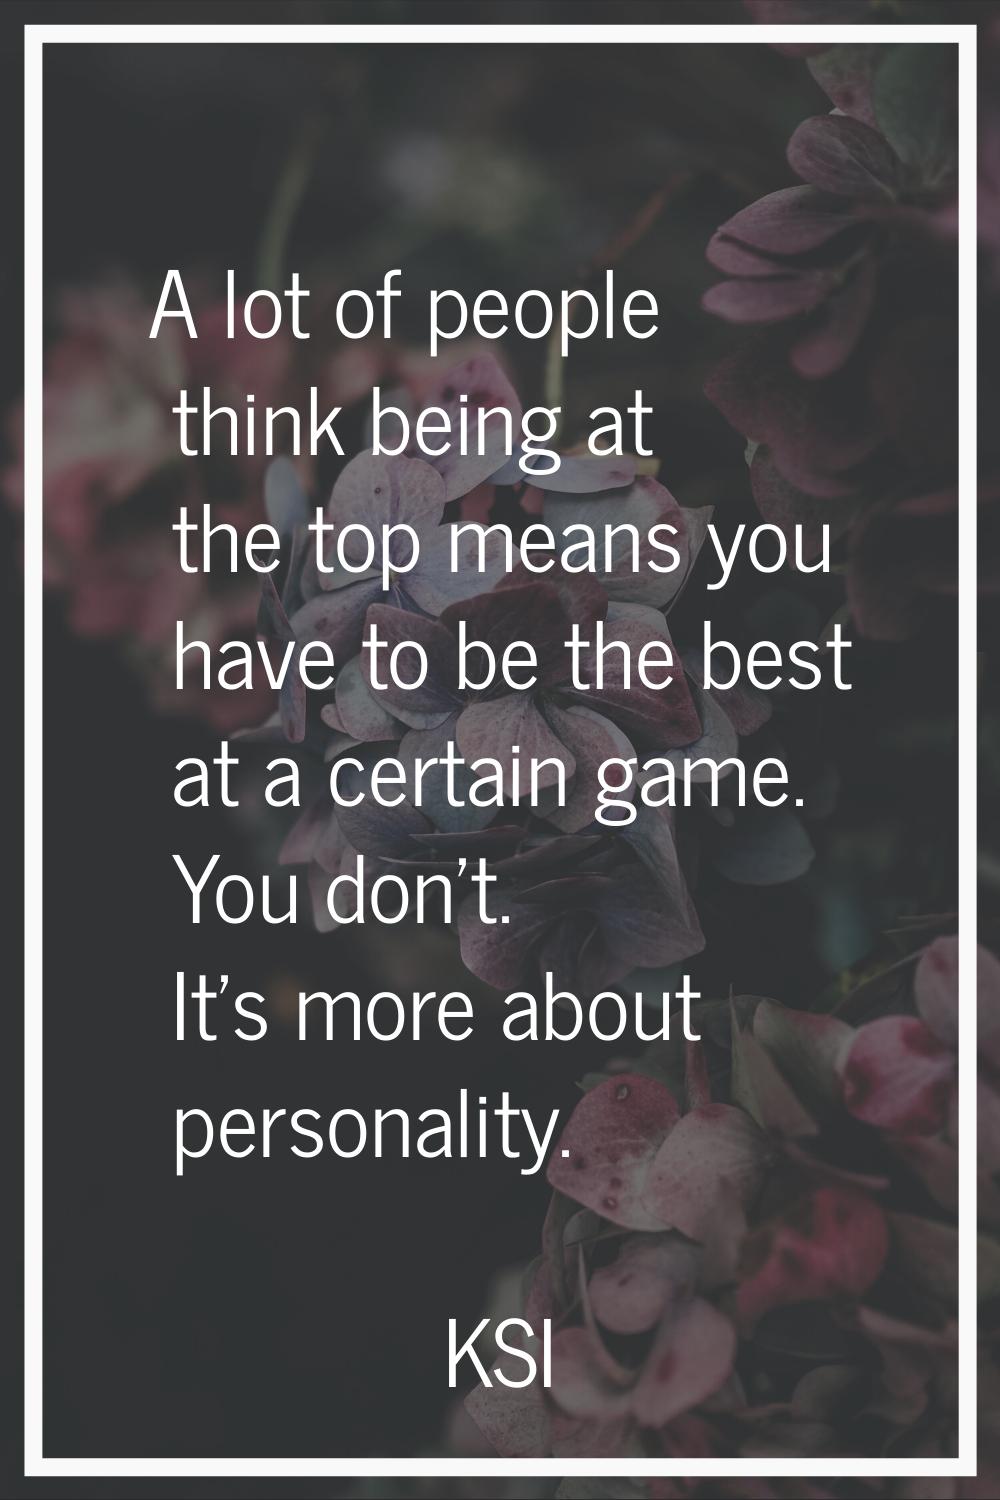 A lot of people think being at the top means you have to be the best at a certain game. You don't. 